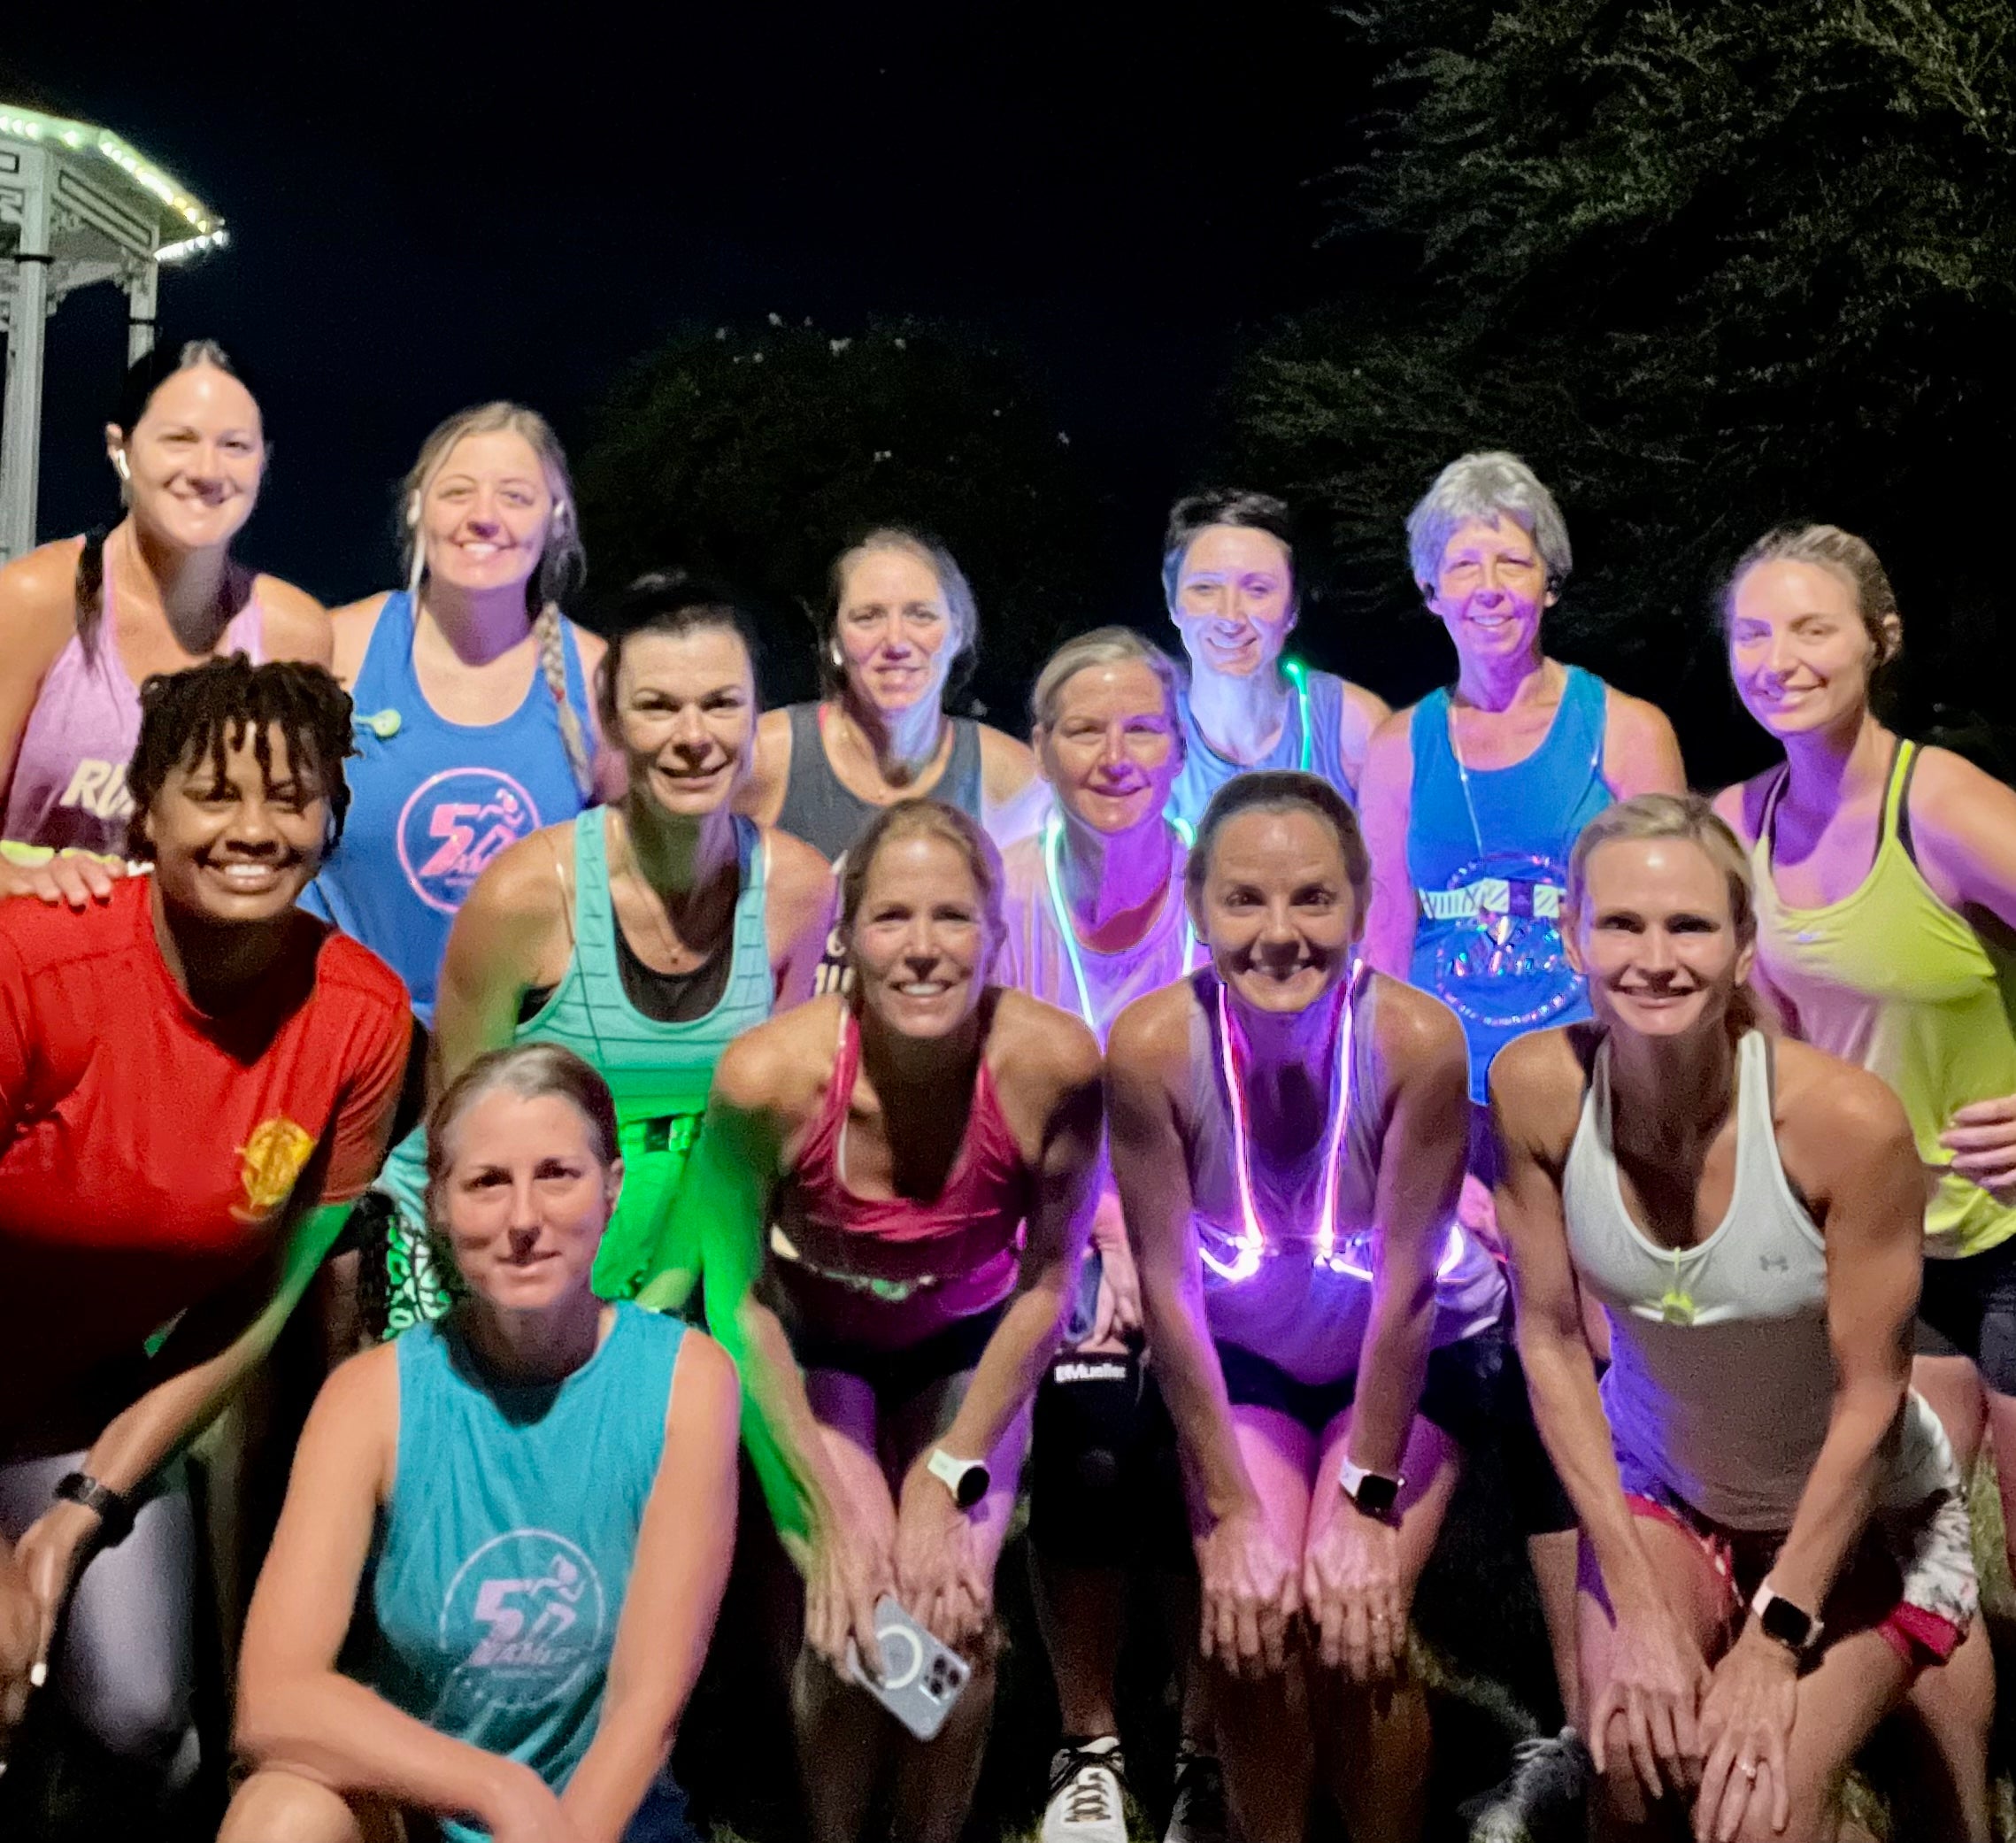 'This could have been any of us' Natchez women 'finish Liza's run' in